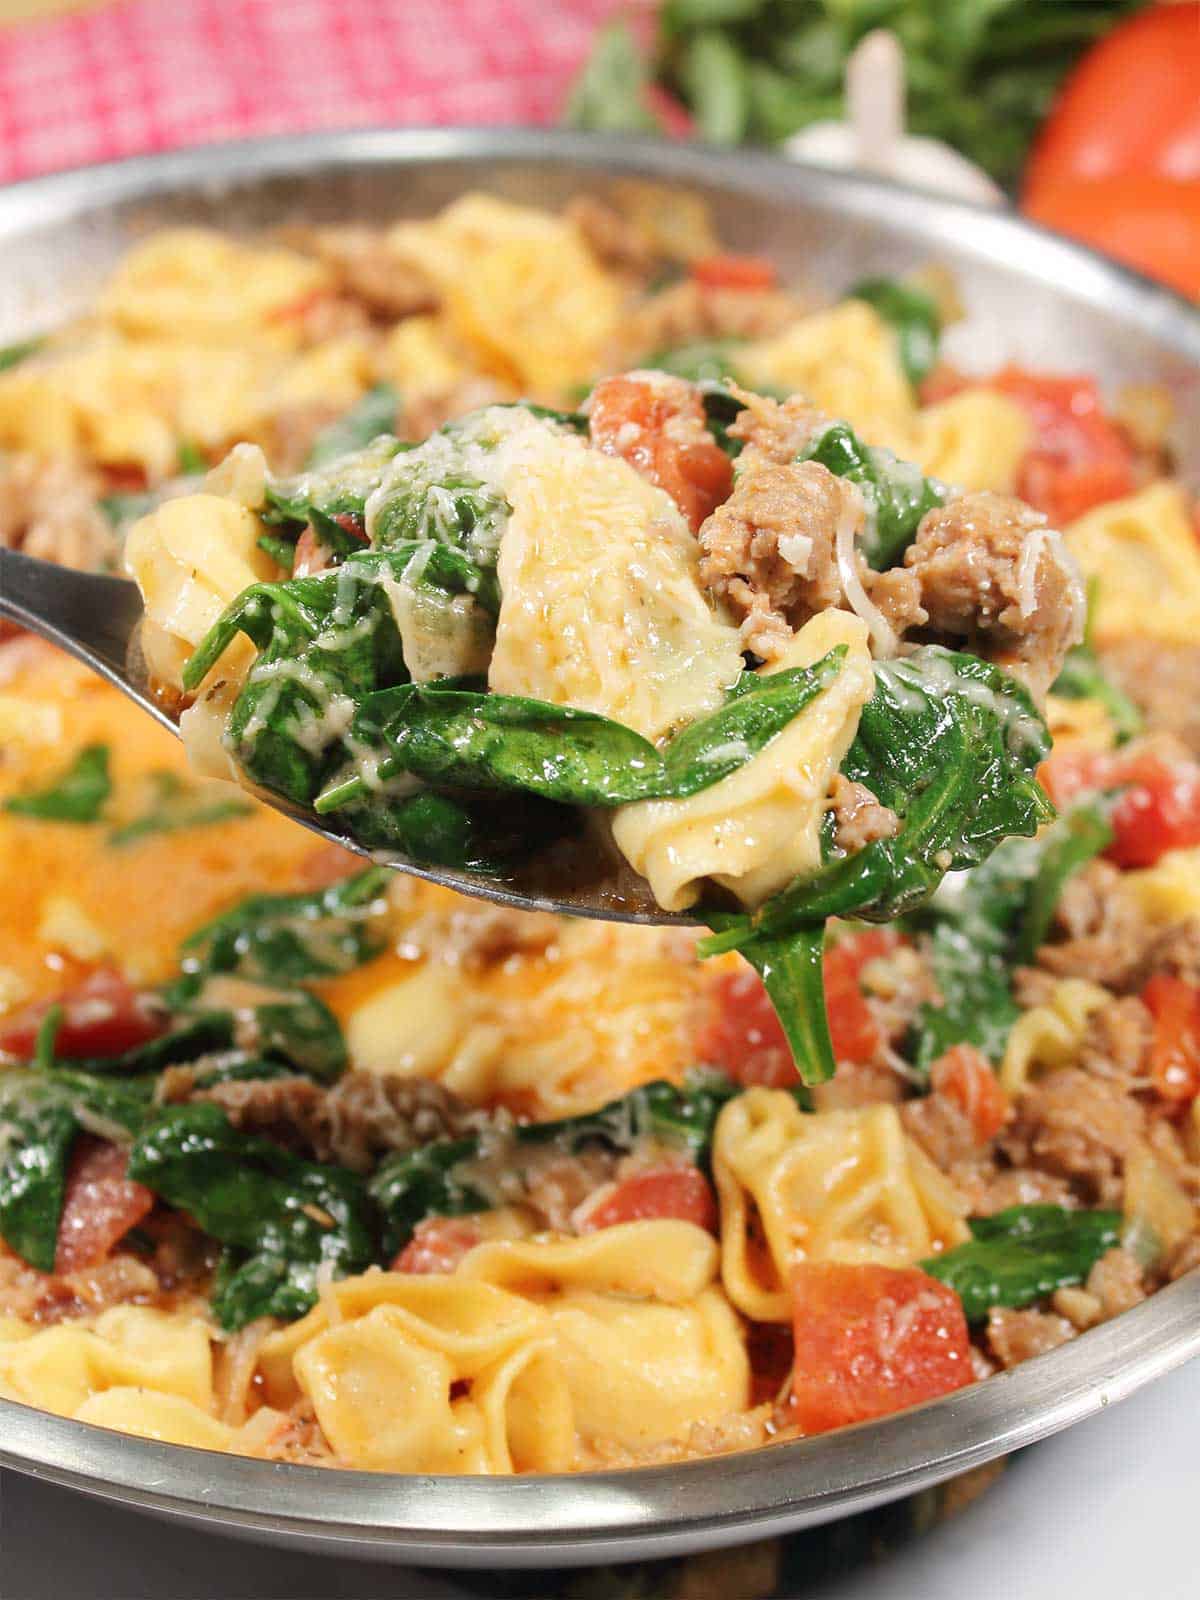 Spoonful of tortellini showing sausage and spinach.